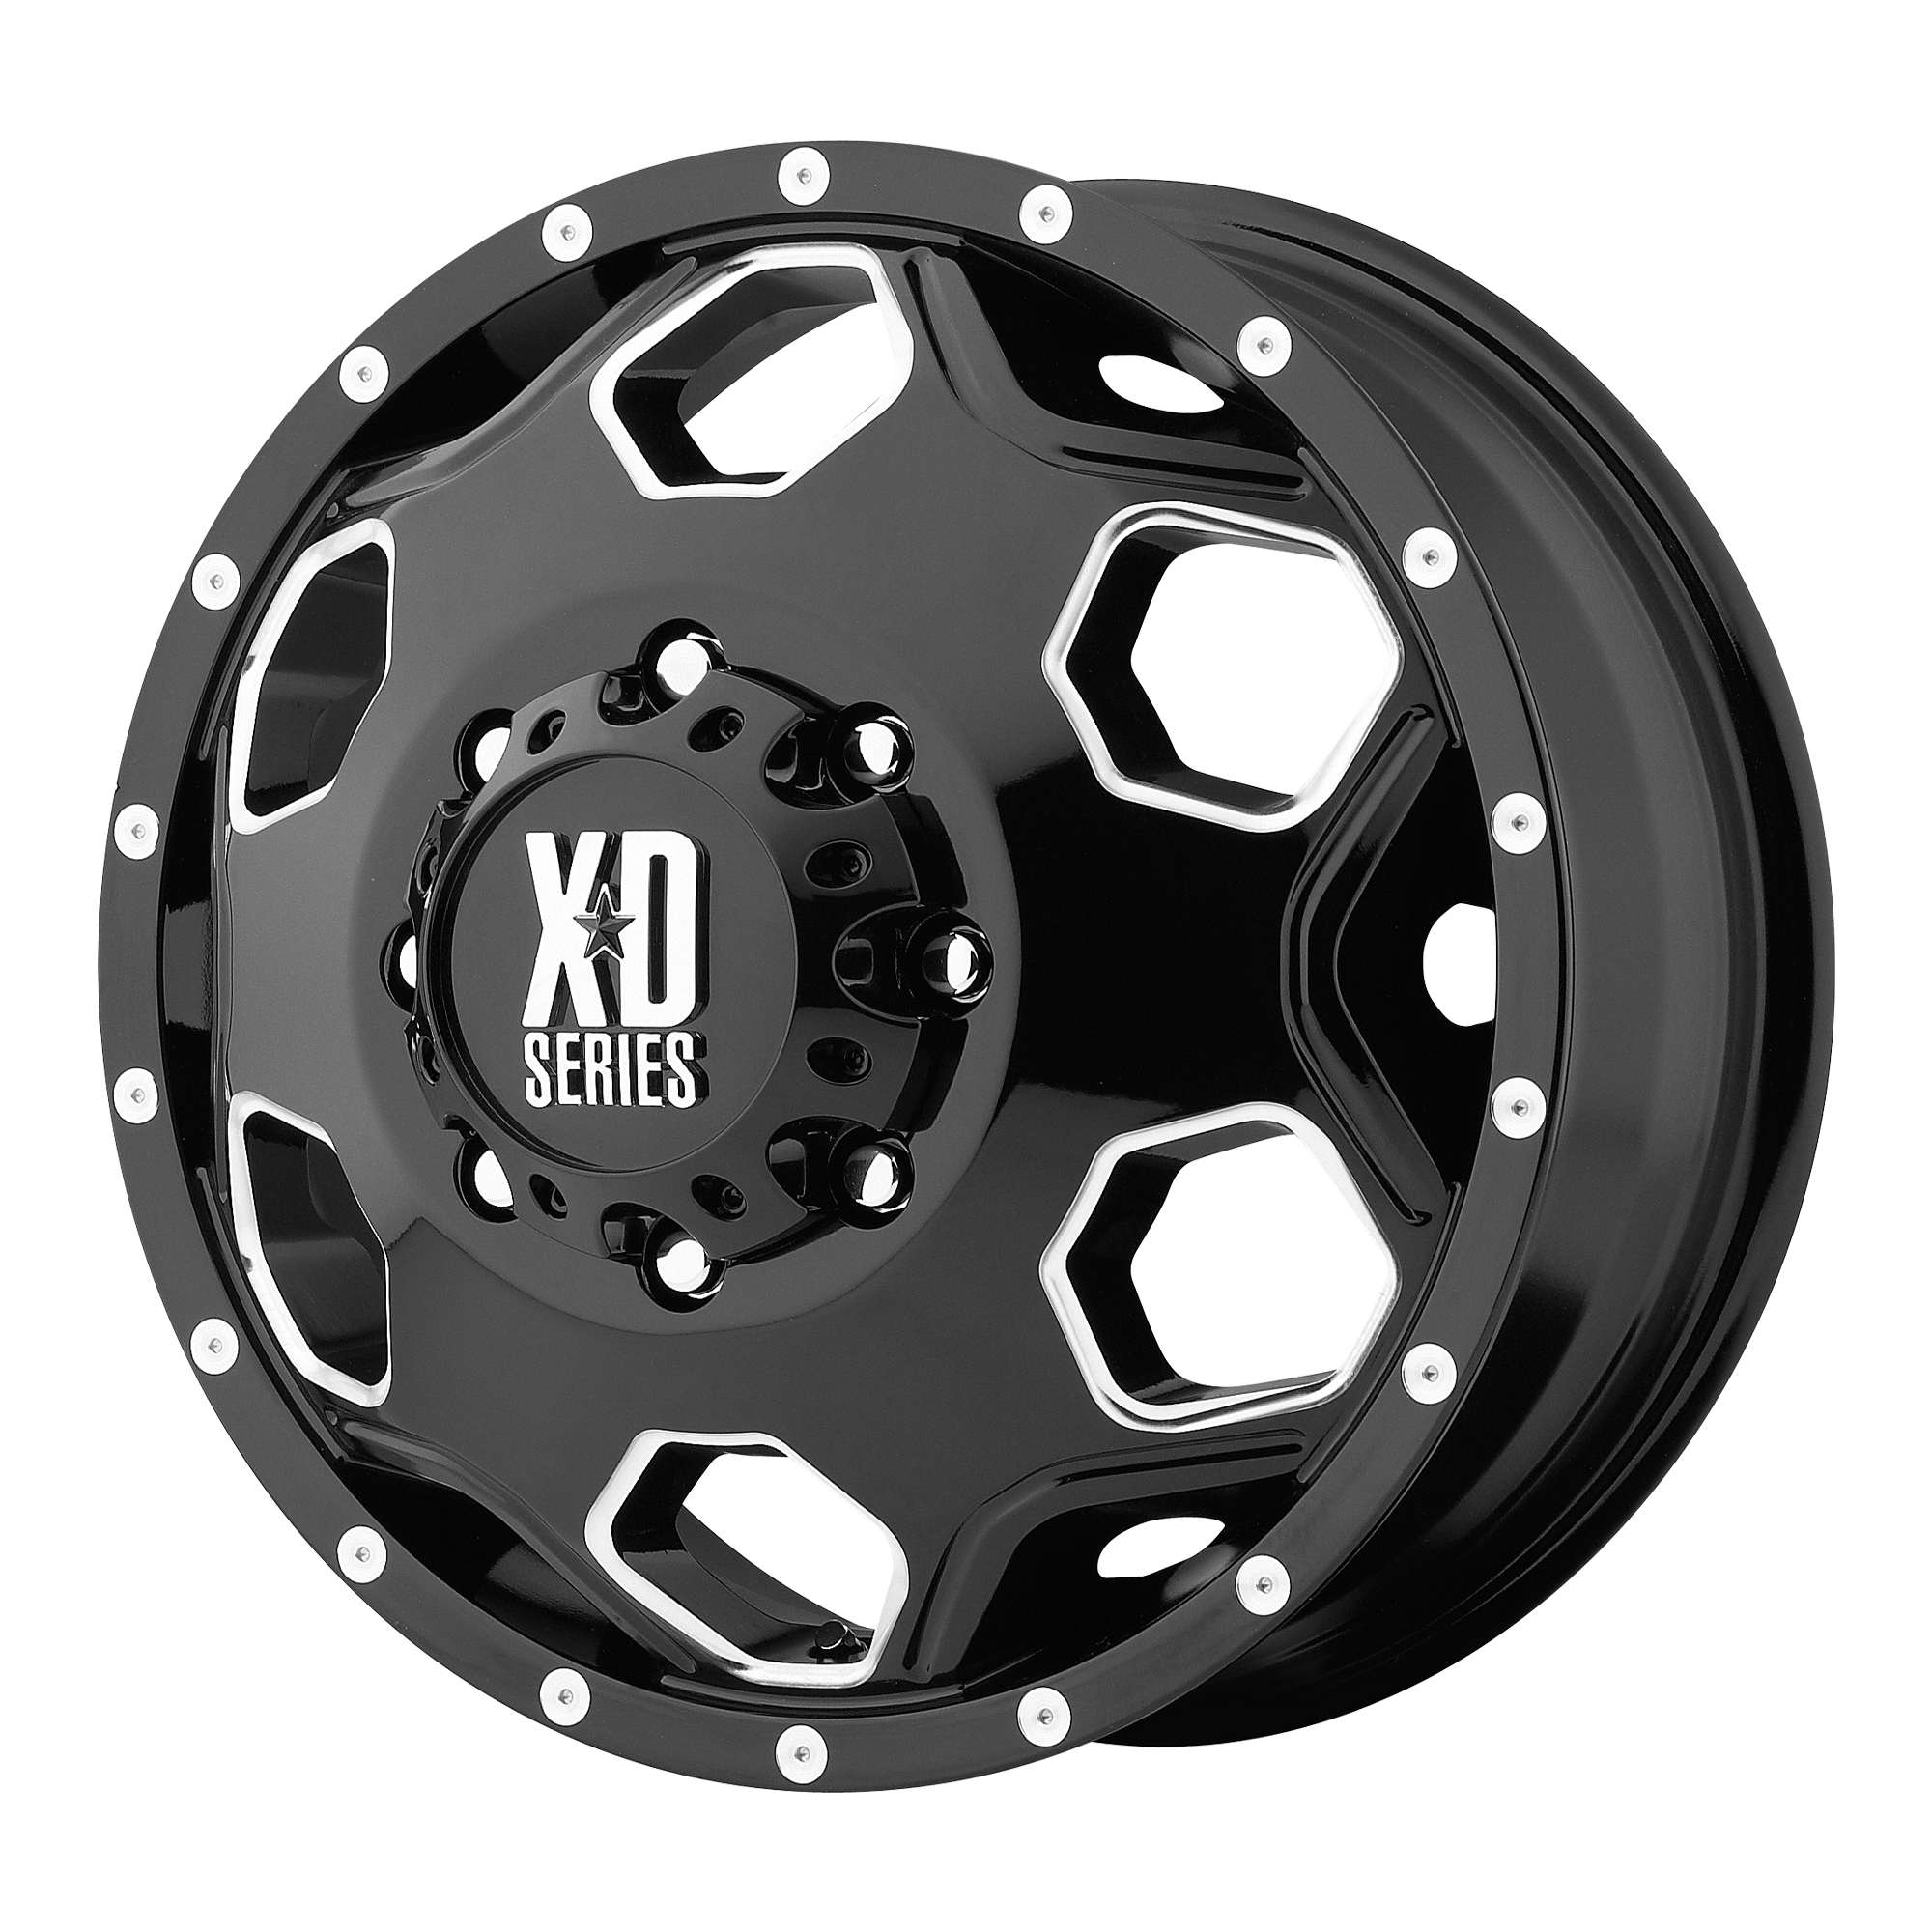 XD XD815 BATALLION GLOSS BLACK WITH MILLED ACCENTS WHEELS | 22X8.25 | 8X165.1 | OFFSET: 127MM | CB: 125.1MM